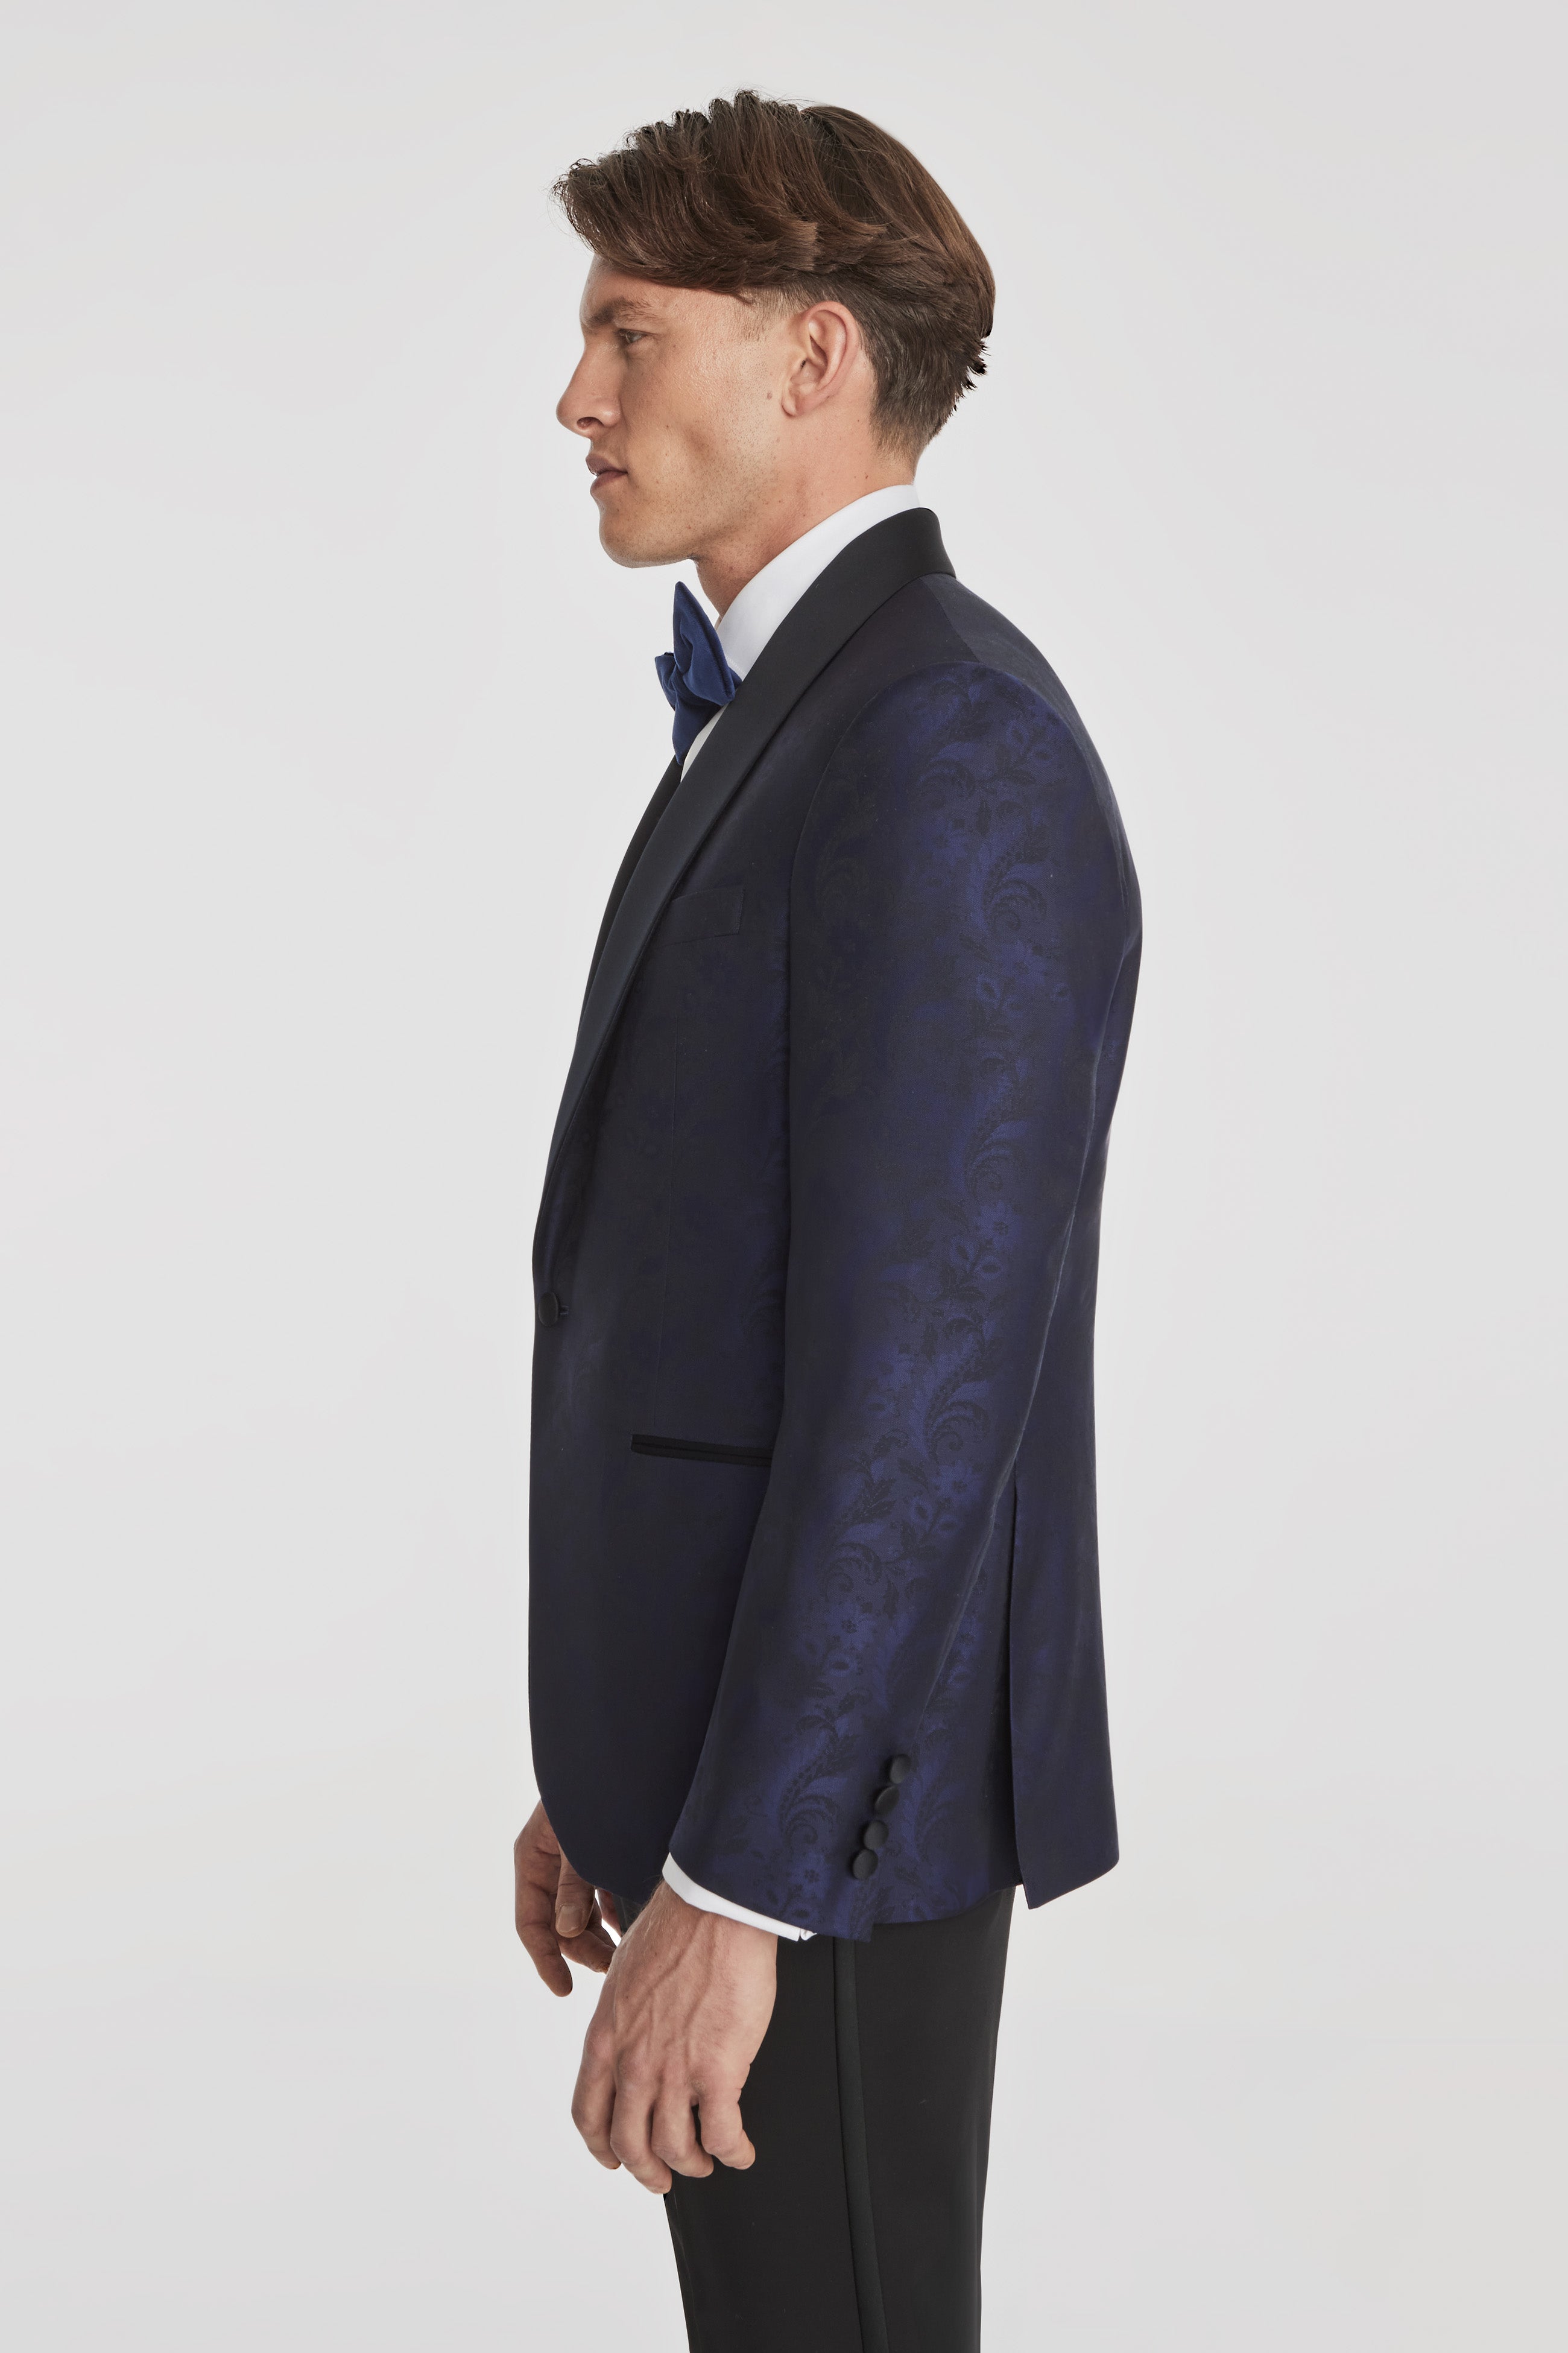 Alt view 4 Ethan Floral Shawl Collar Dinner Jacket in Navy